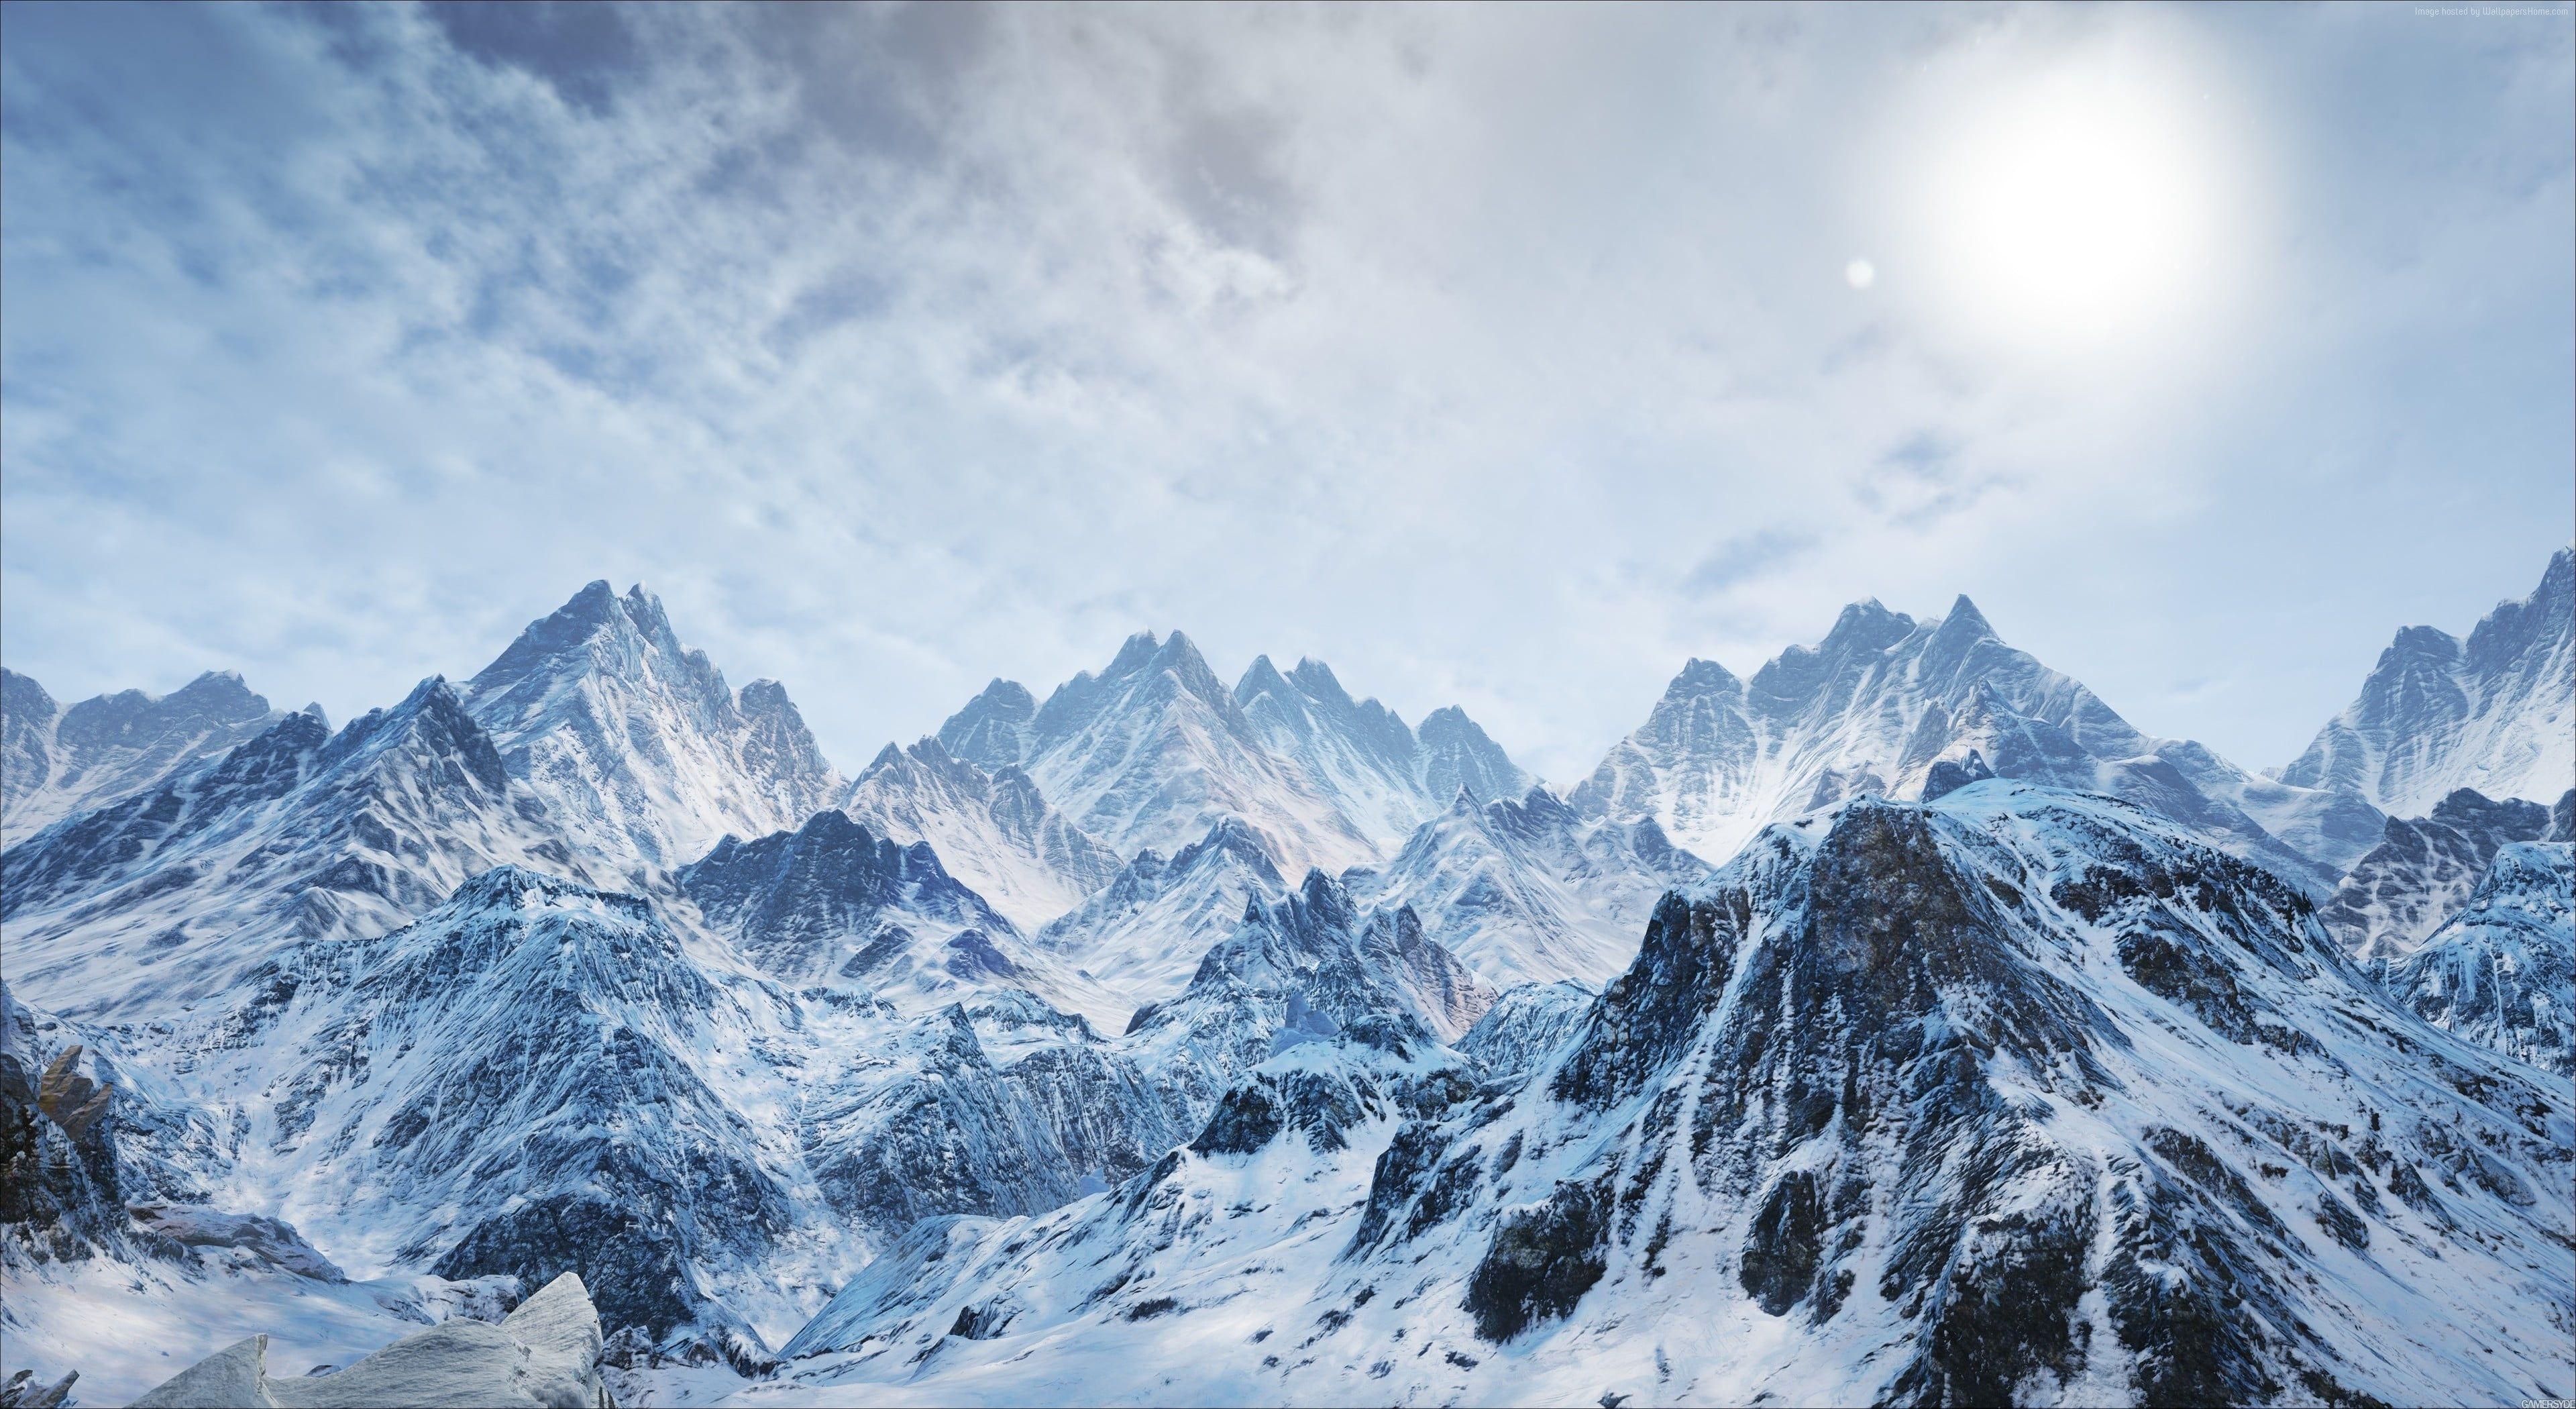 Snow Capped Mountains Wallpapers - Top Free Snow Capped Mountains